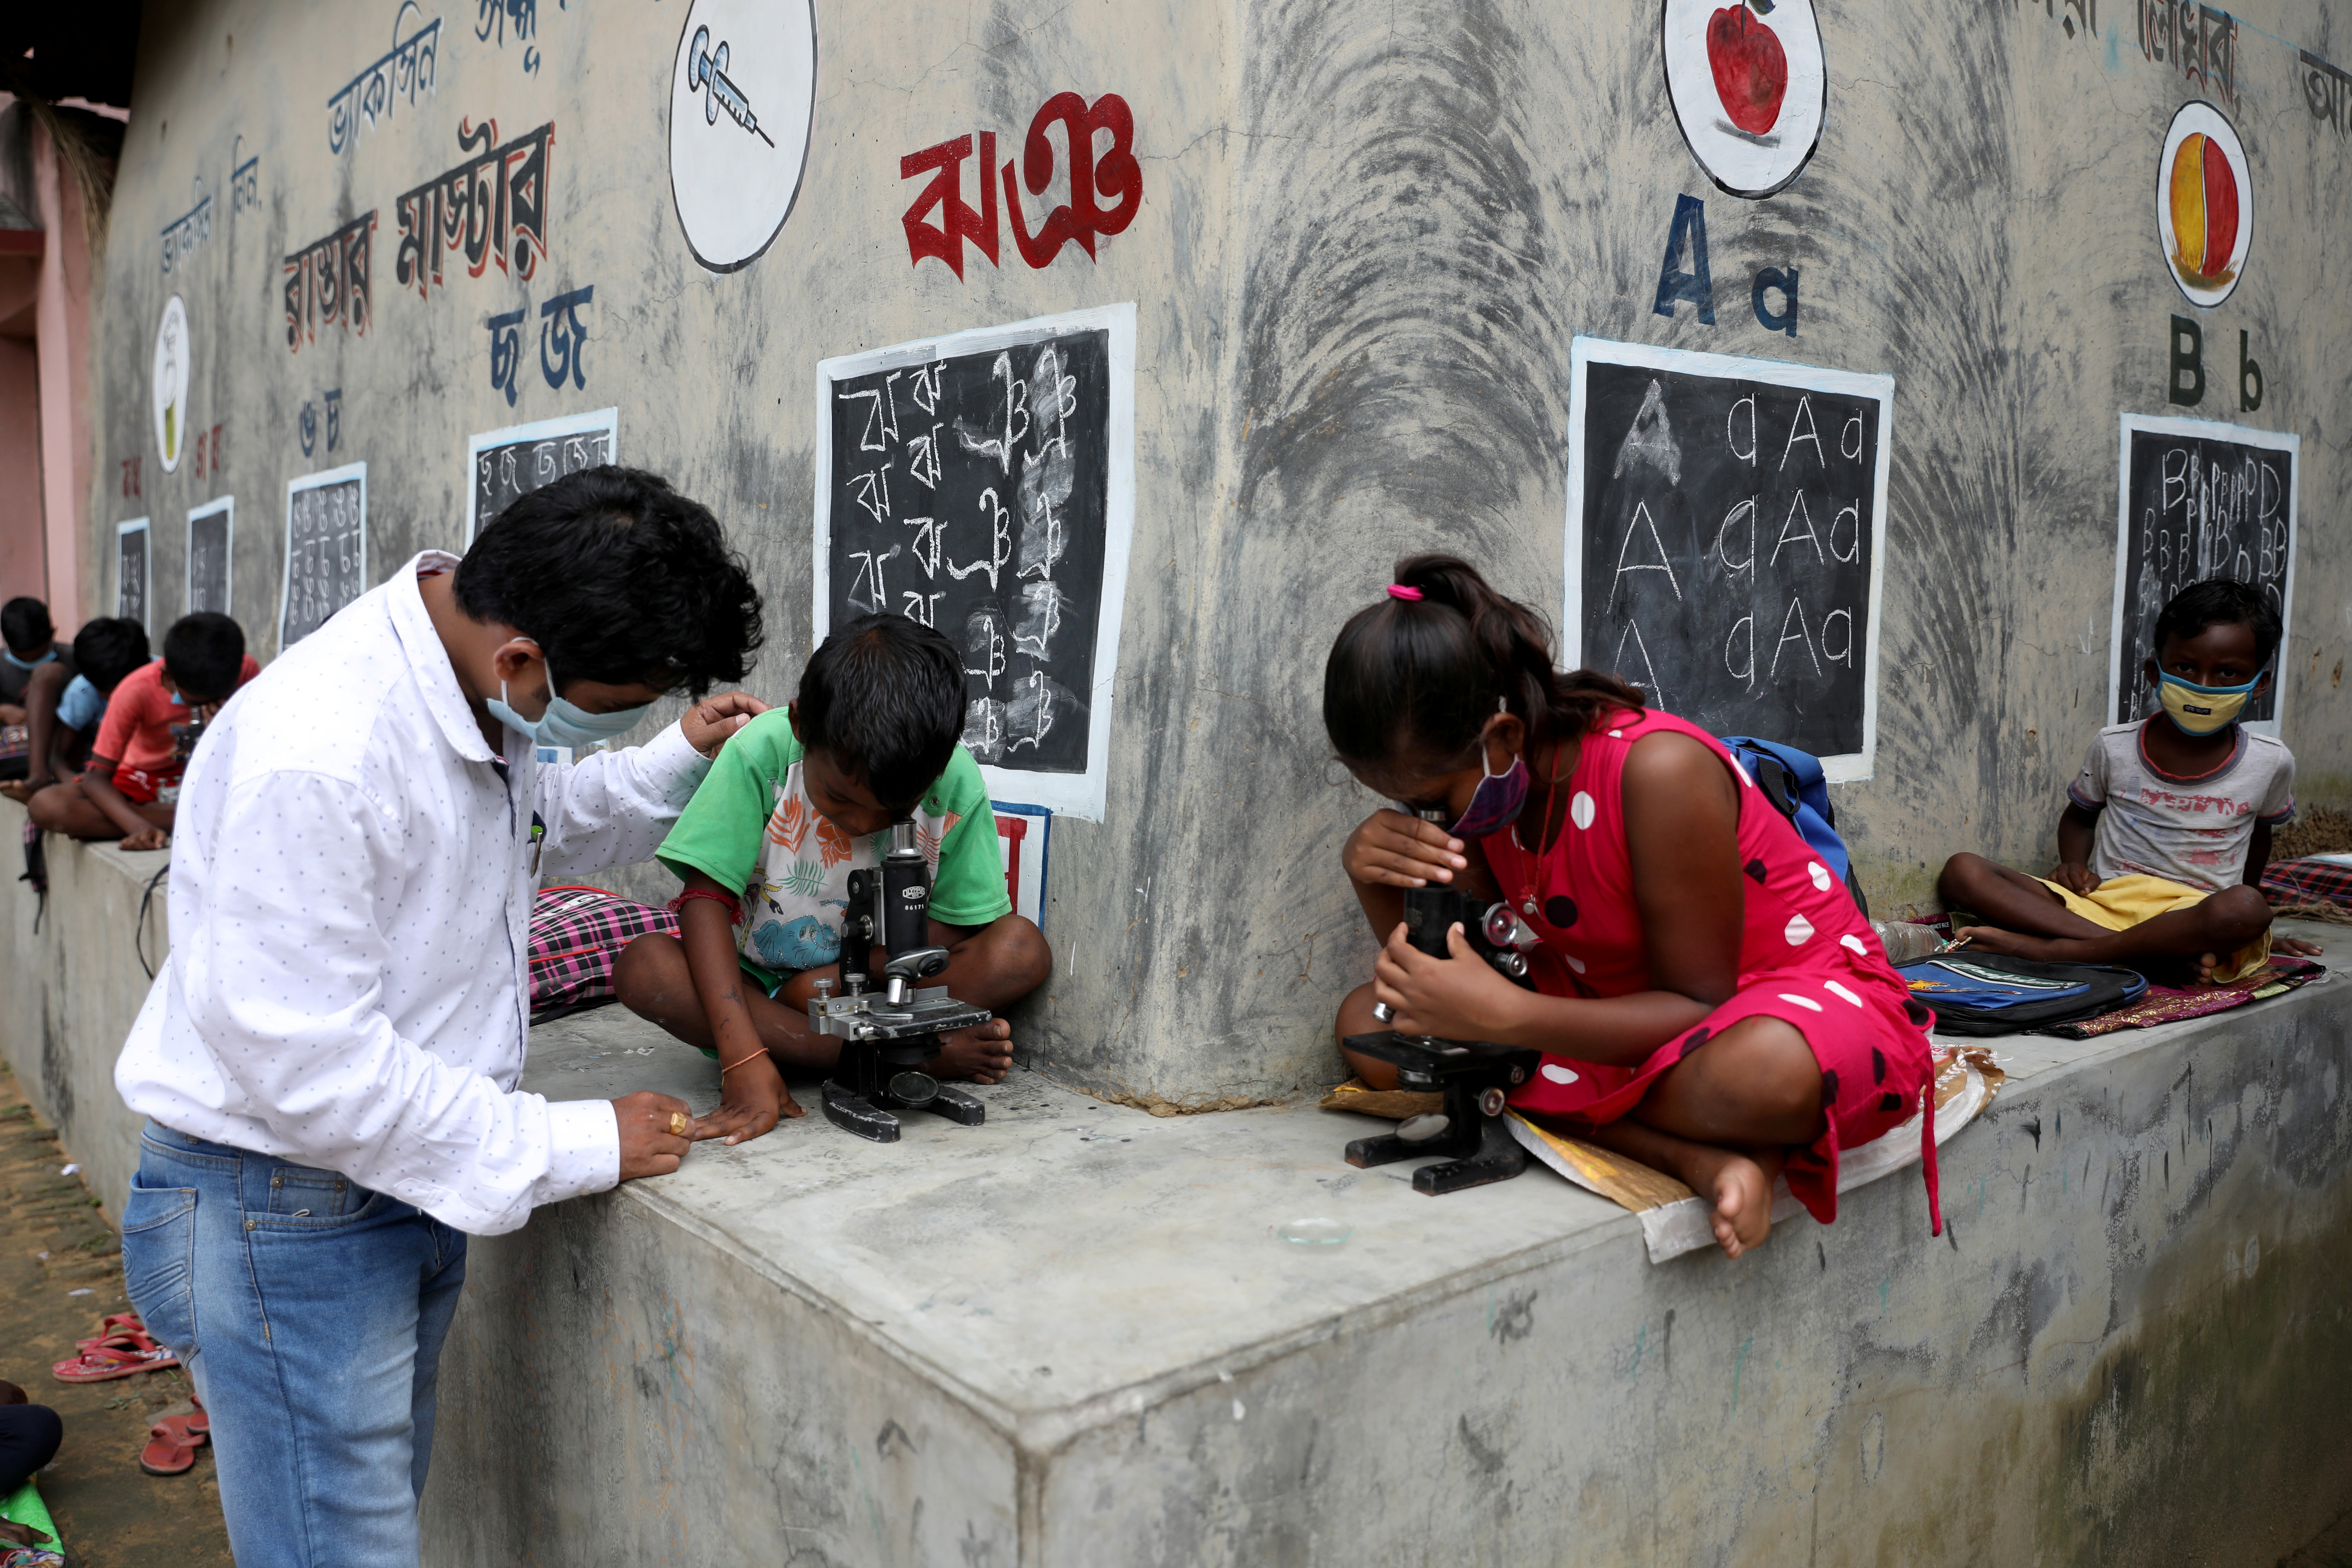 Deep Narayan Nayak teaches children how to use microscope in an open-air class outside the houses with the walls converted into black boards at Joba Attpara village